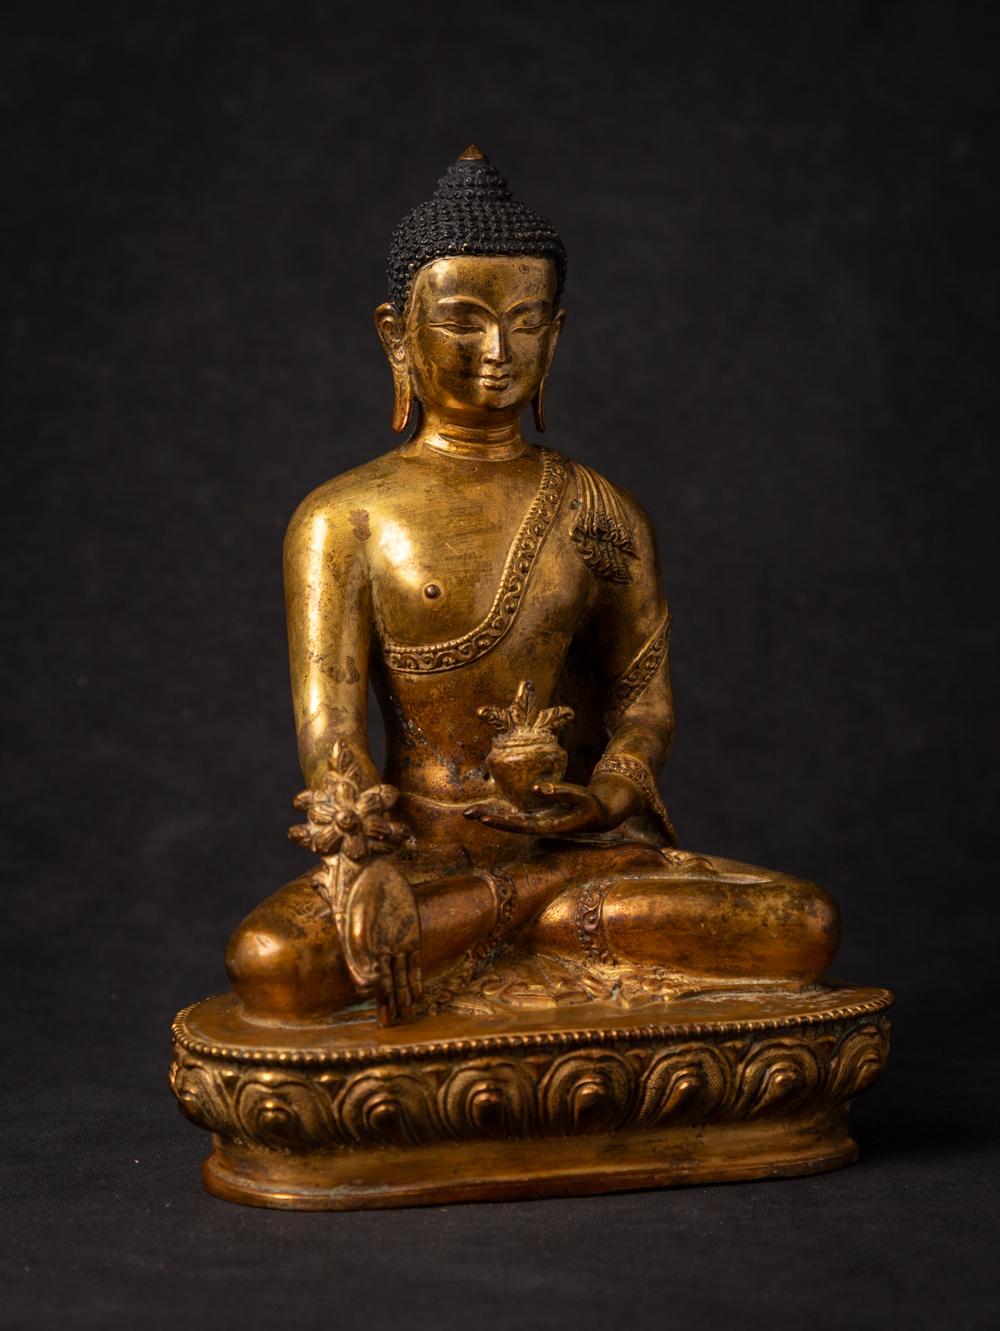 This old bronze Nepali Medicine Buddha statue is a true masterpiece of craftsmanship and spirituality. Standing at a majestic 21.7 cm in height, with dimensions of 15.5 cm in width and 10.2 cm in depth, it is a substantial representation of the